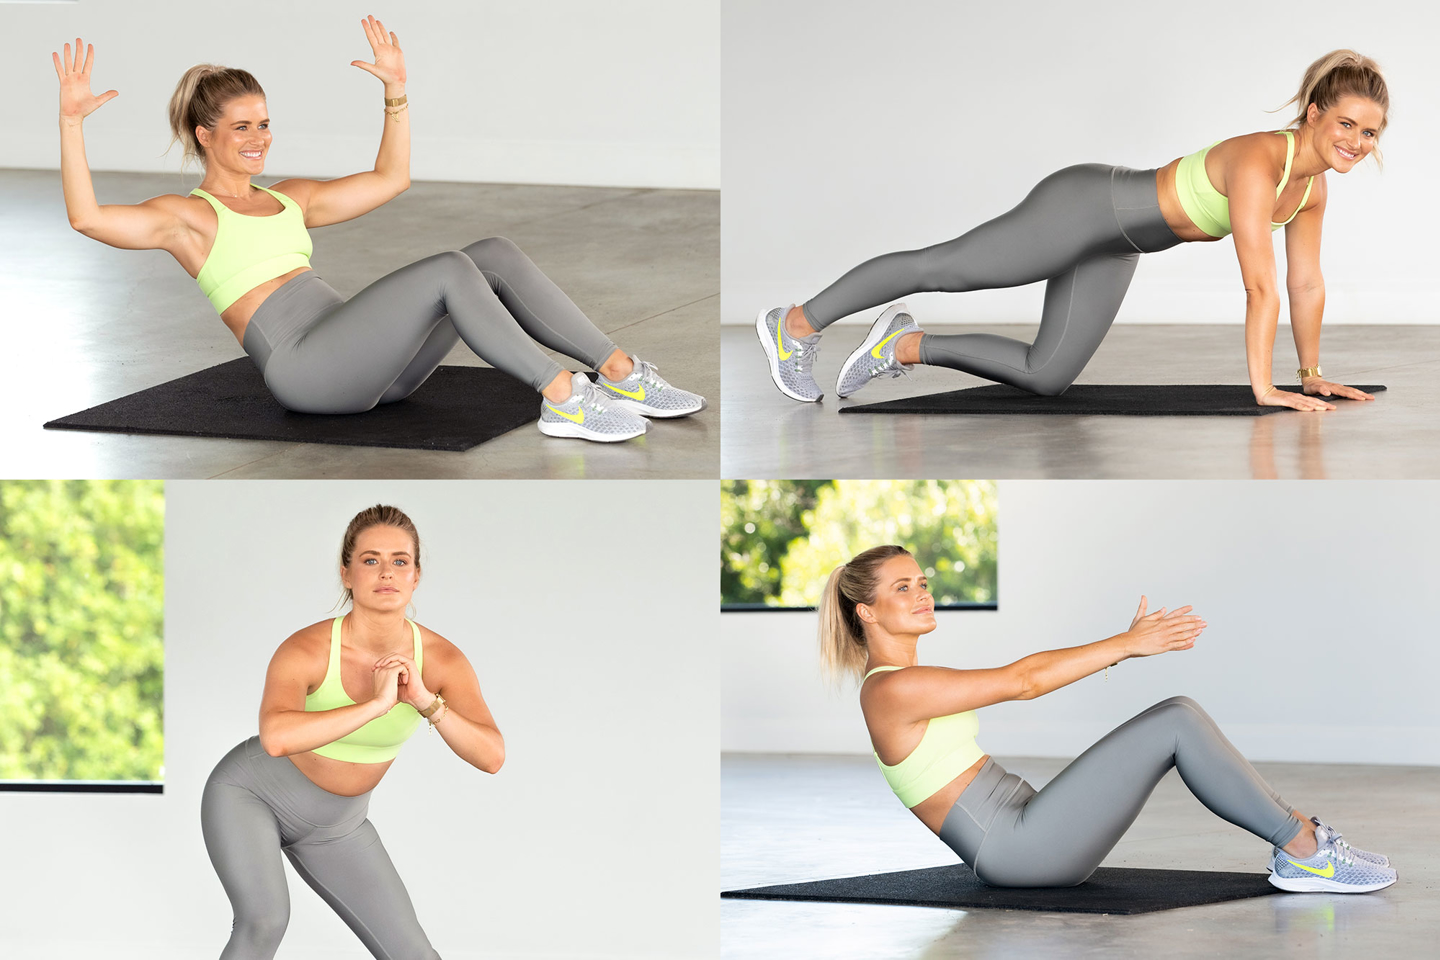 Alexz's top 10 low-impact exercises to bring the burn